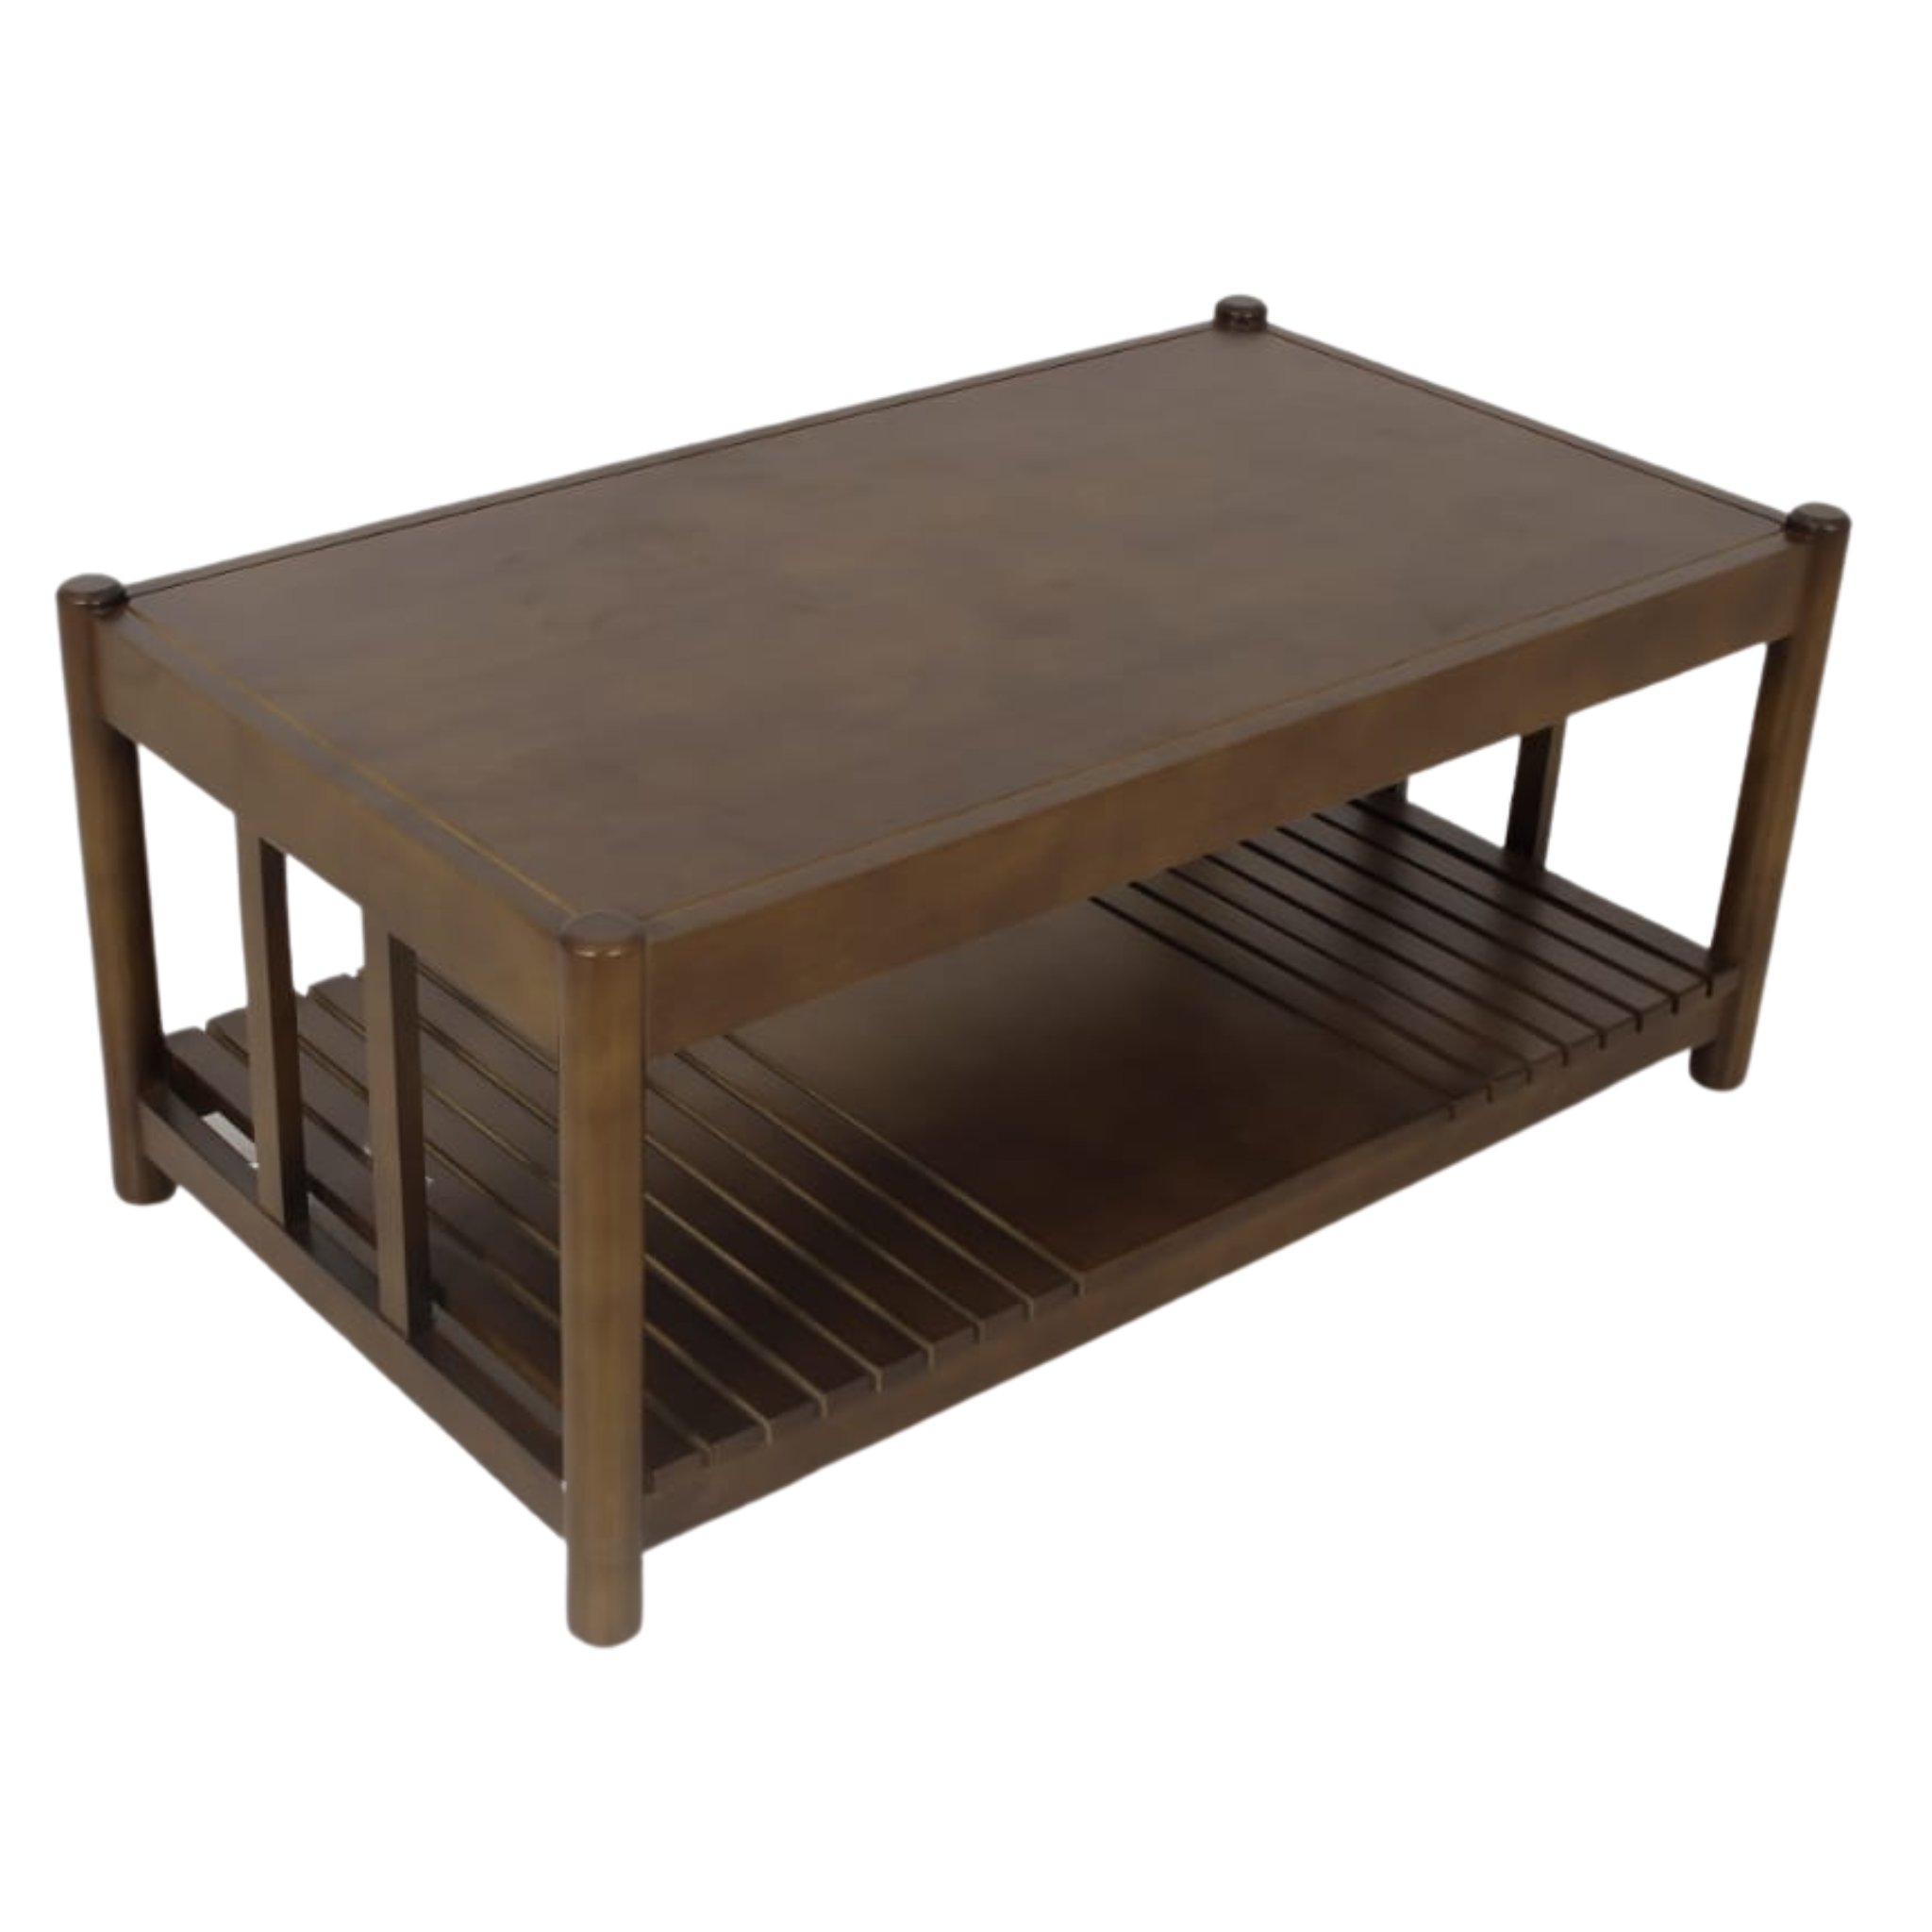 Indus Coffee Table